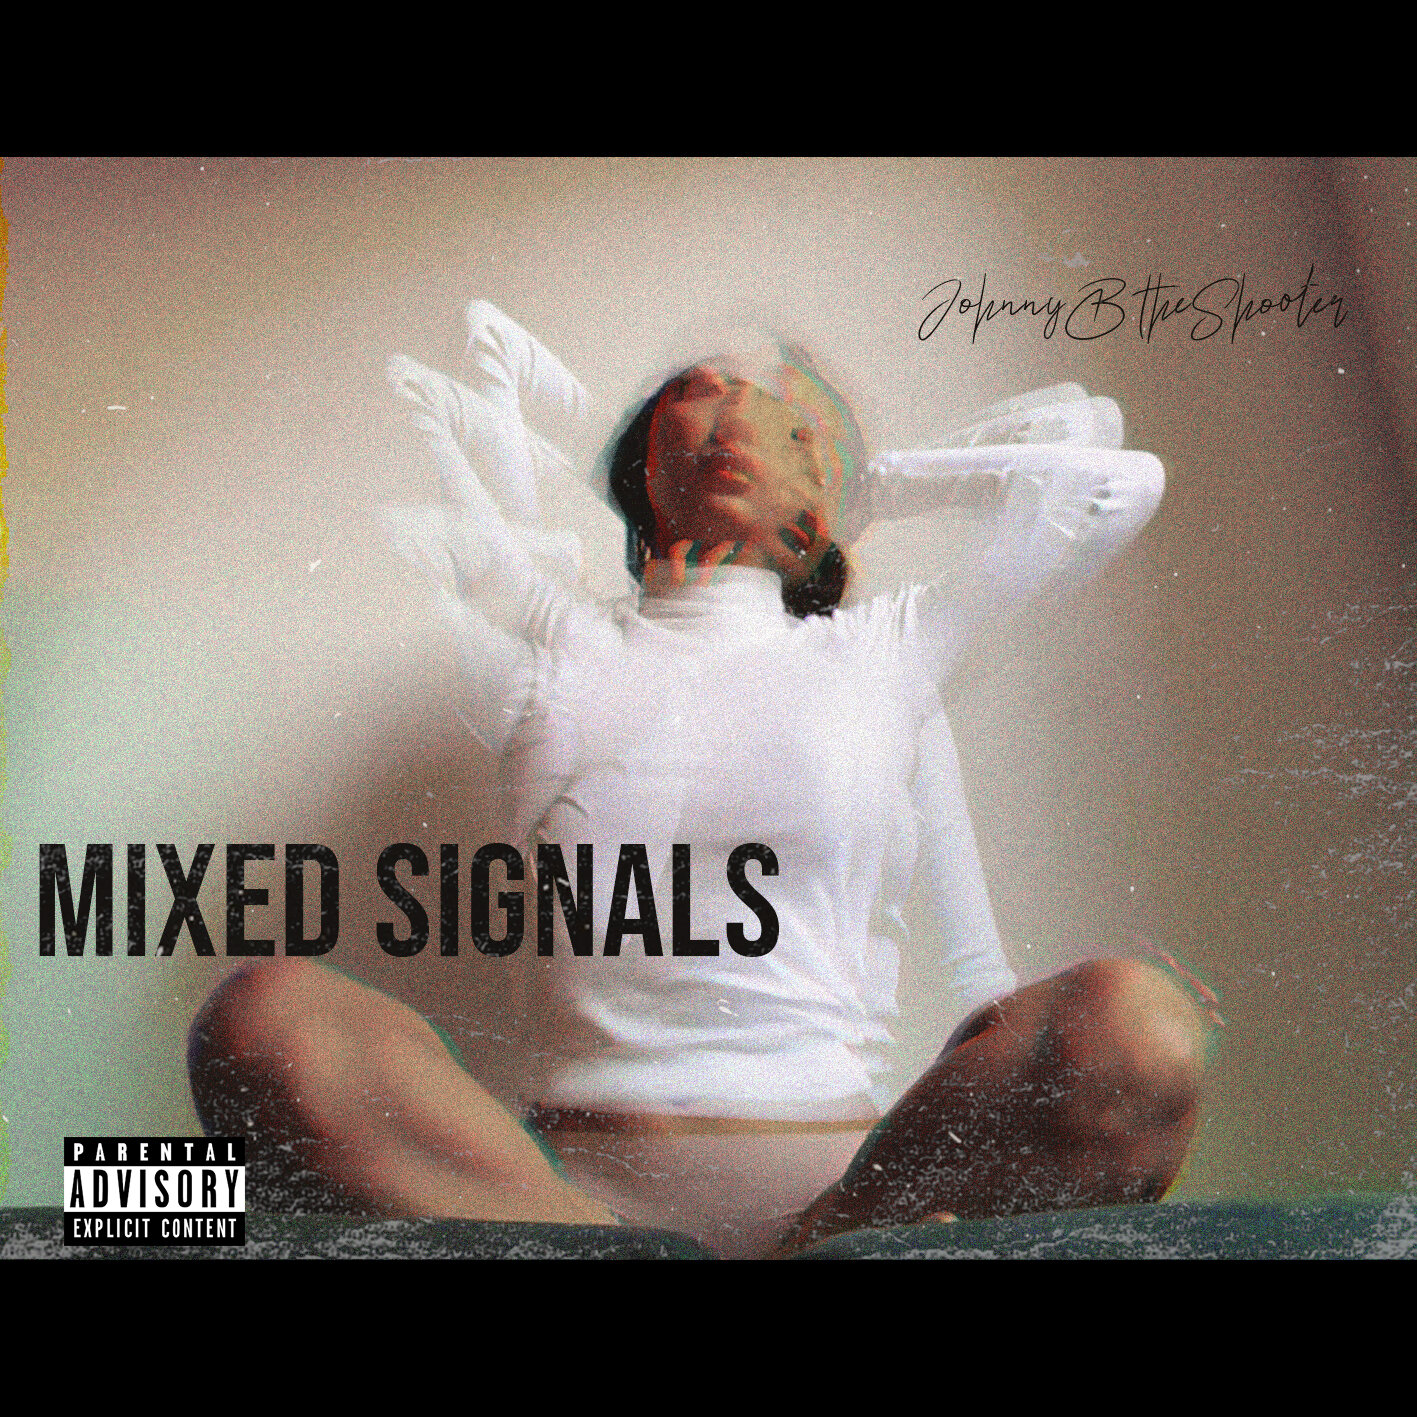 Mixed Signals - JohnnyB theShooter COVER.jpg